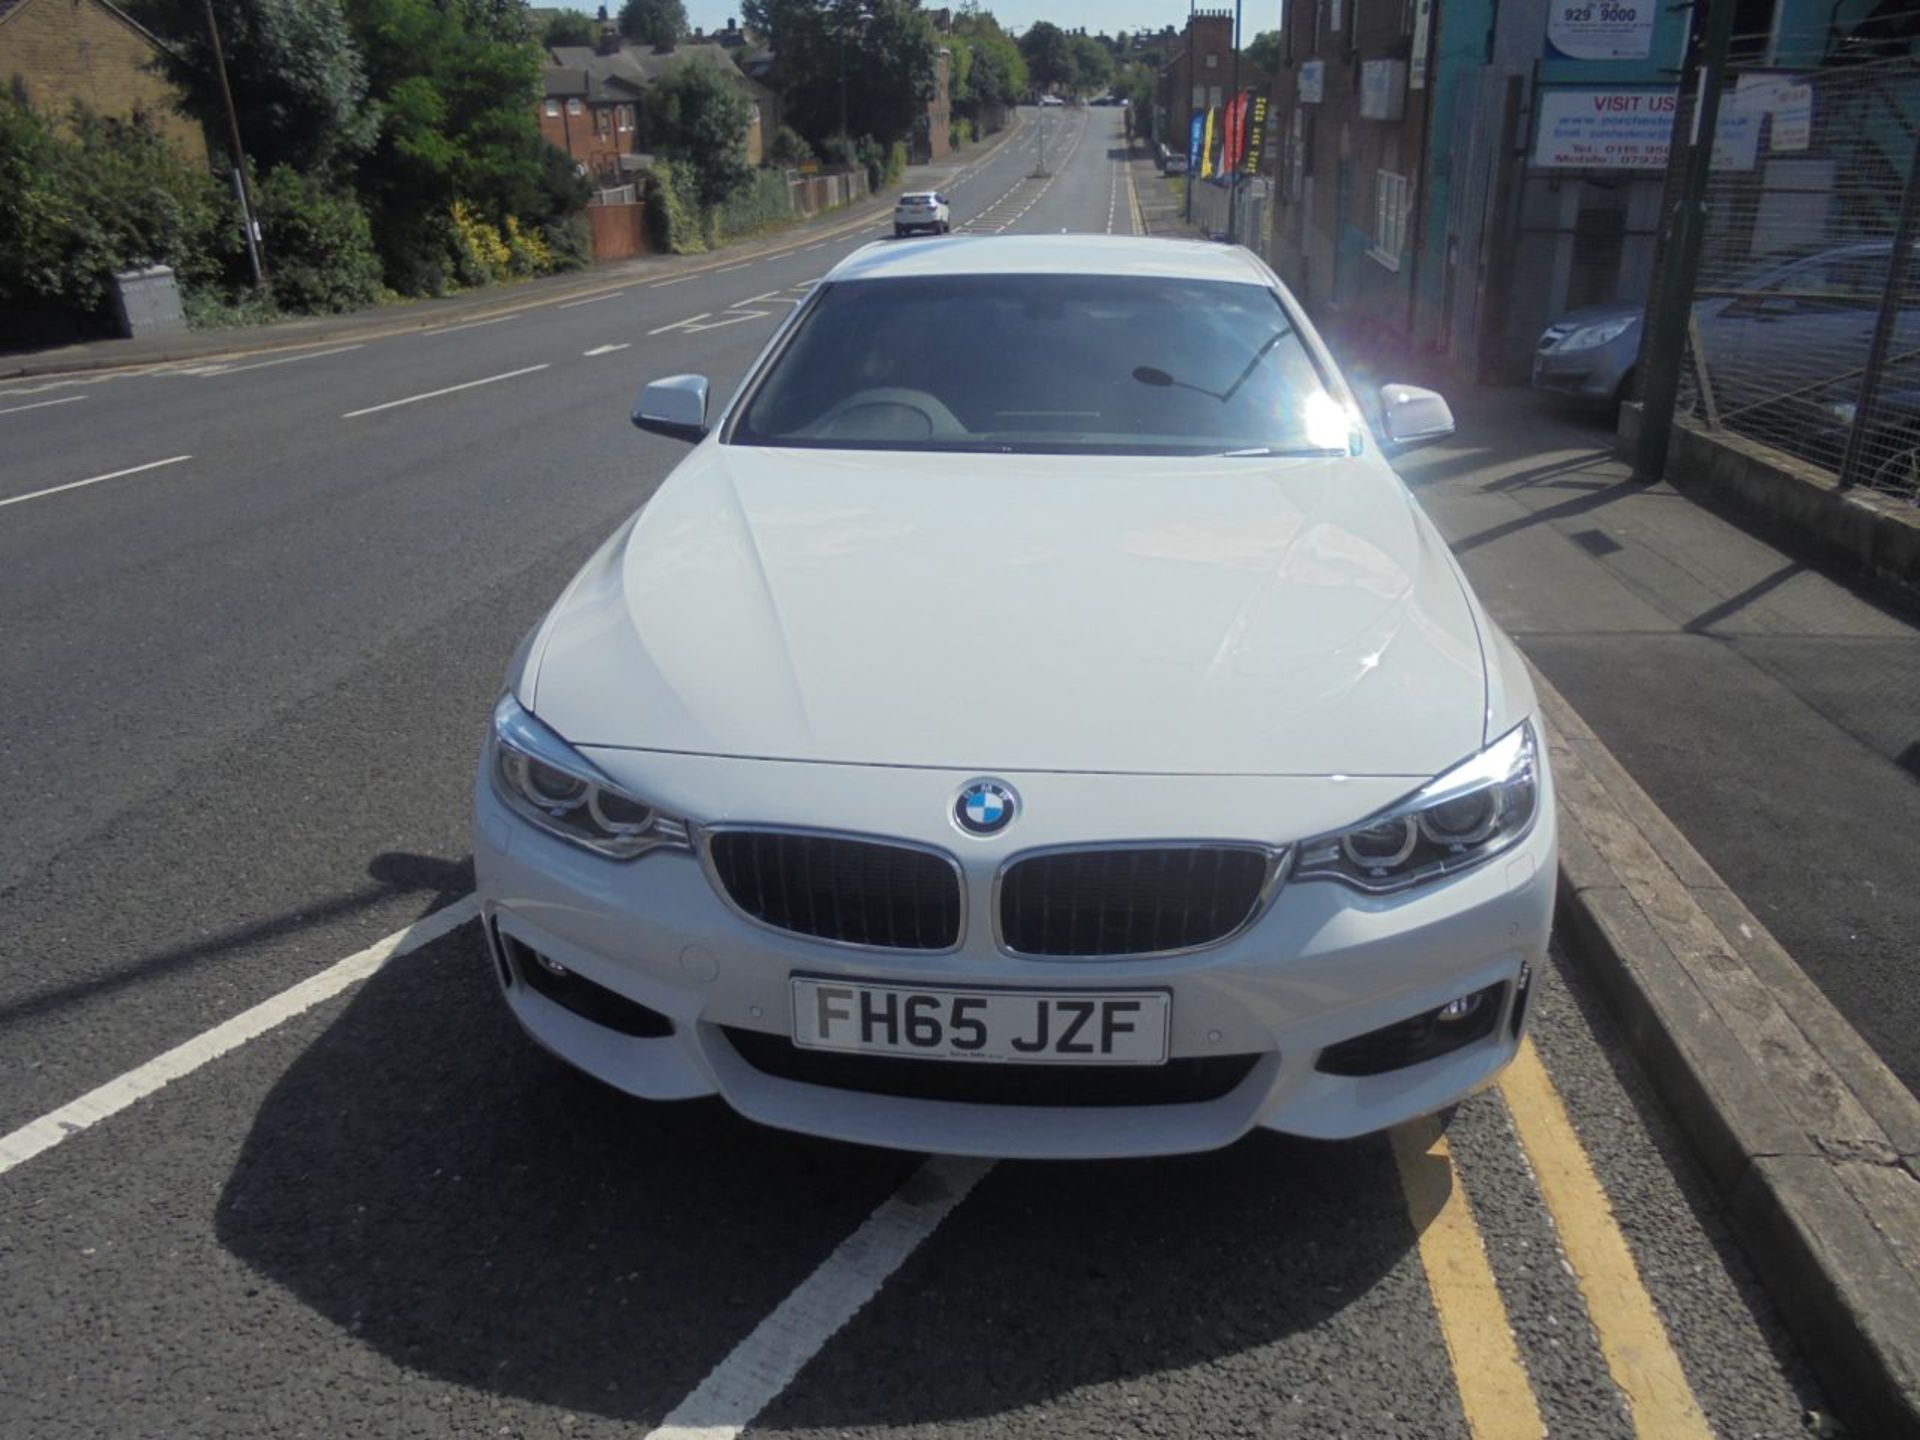 2015 (65 REG), BMW 4 SERIES GRAN COUPE 3.0 435I M SPORT GRAN COUPE AUTO 5DR COUPE, 1,200 MILES ONLY - Image 6 of 11